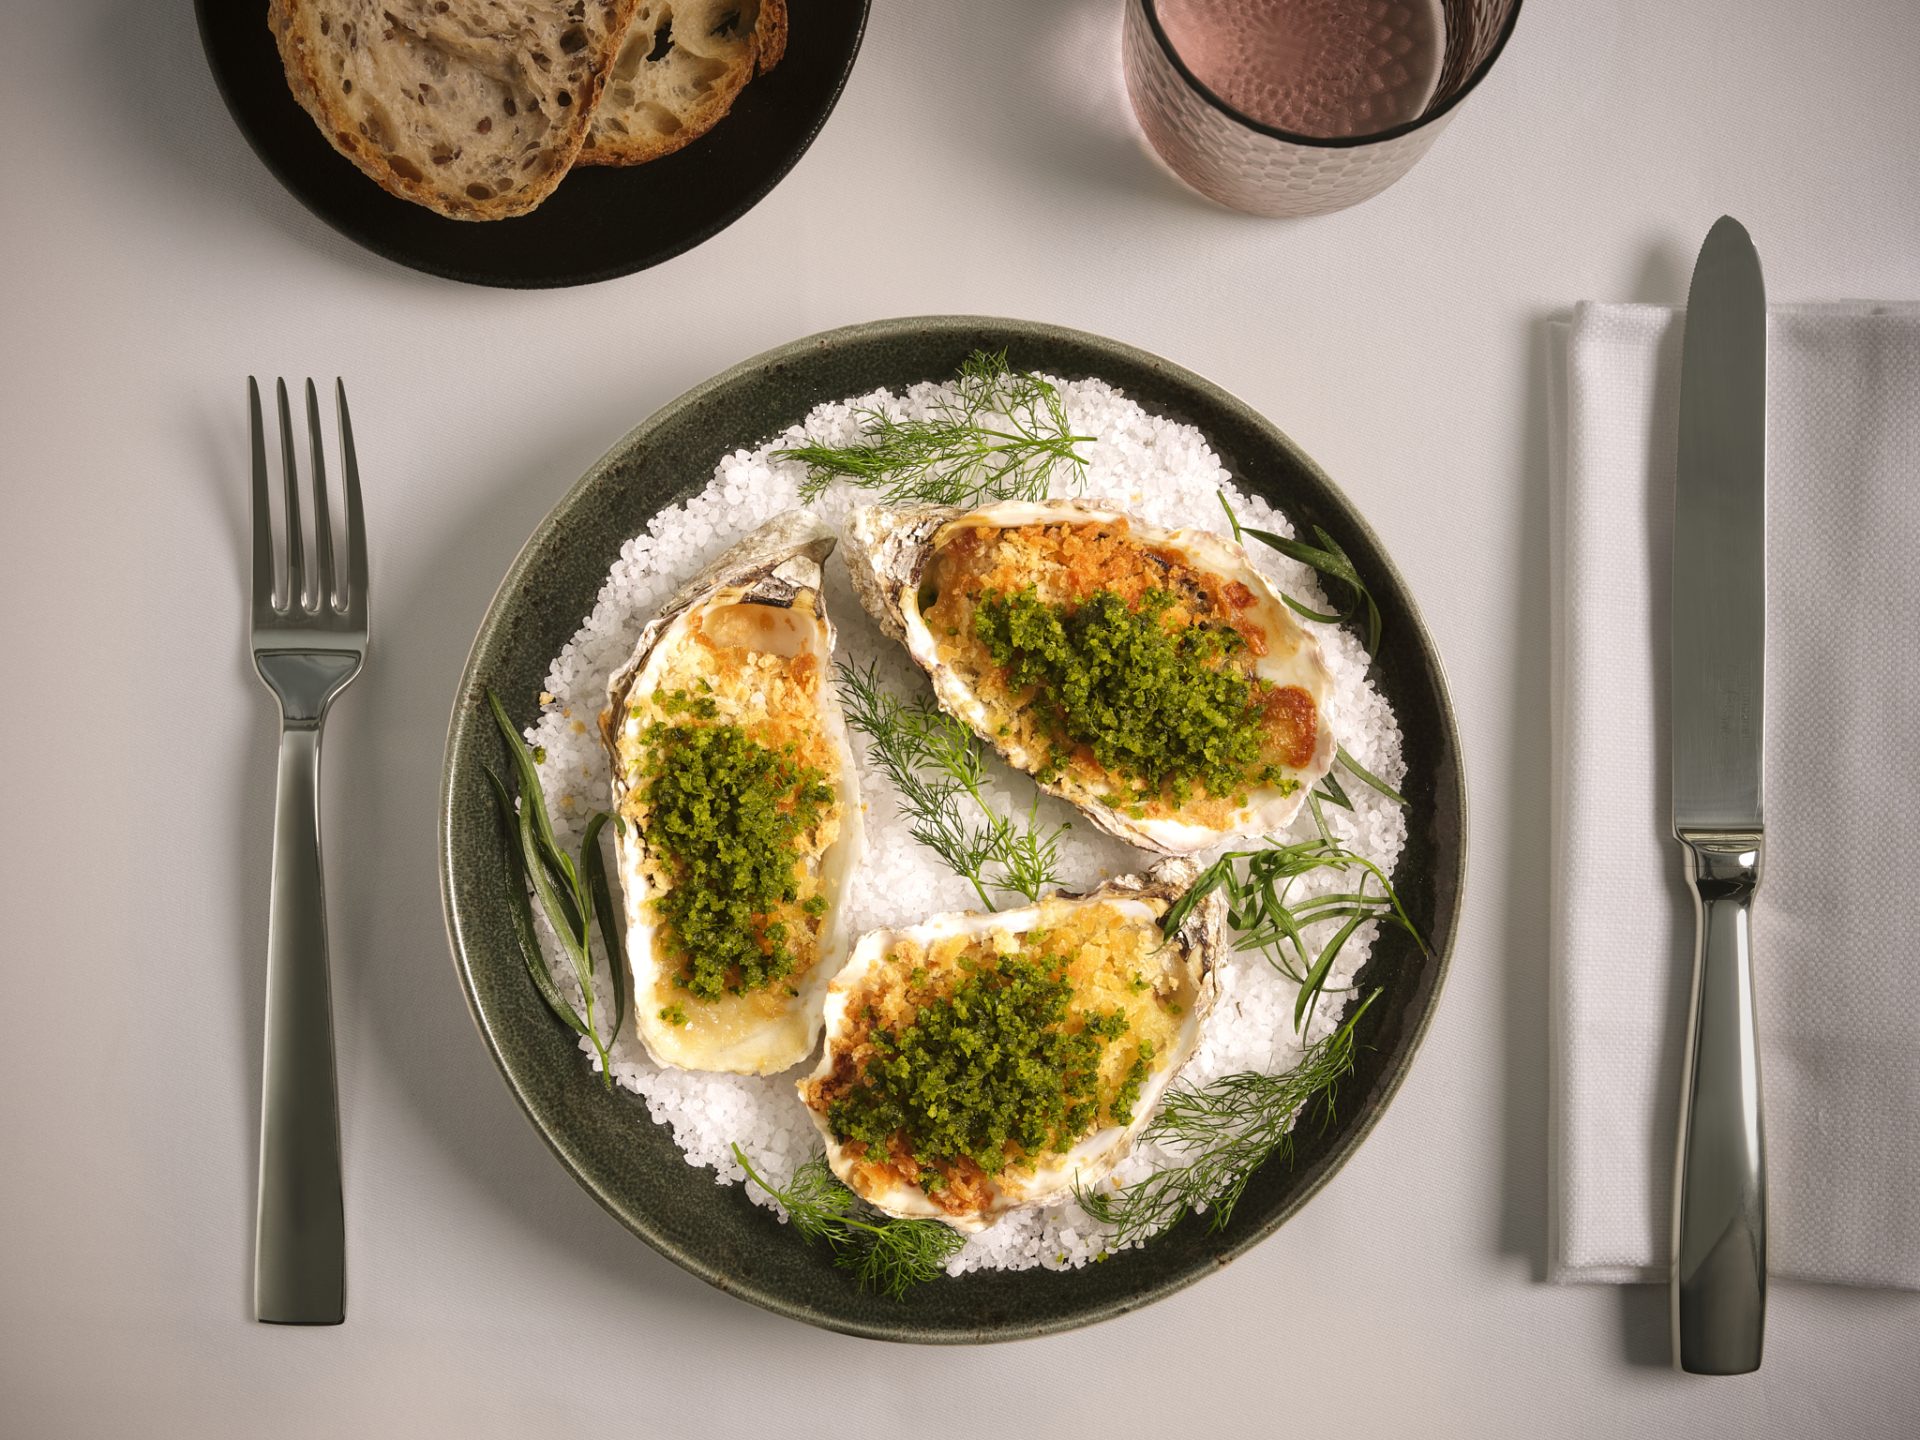 Iconic New York dish Rockefeller Oysters at Rivington Restaurant in Milan